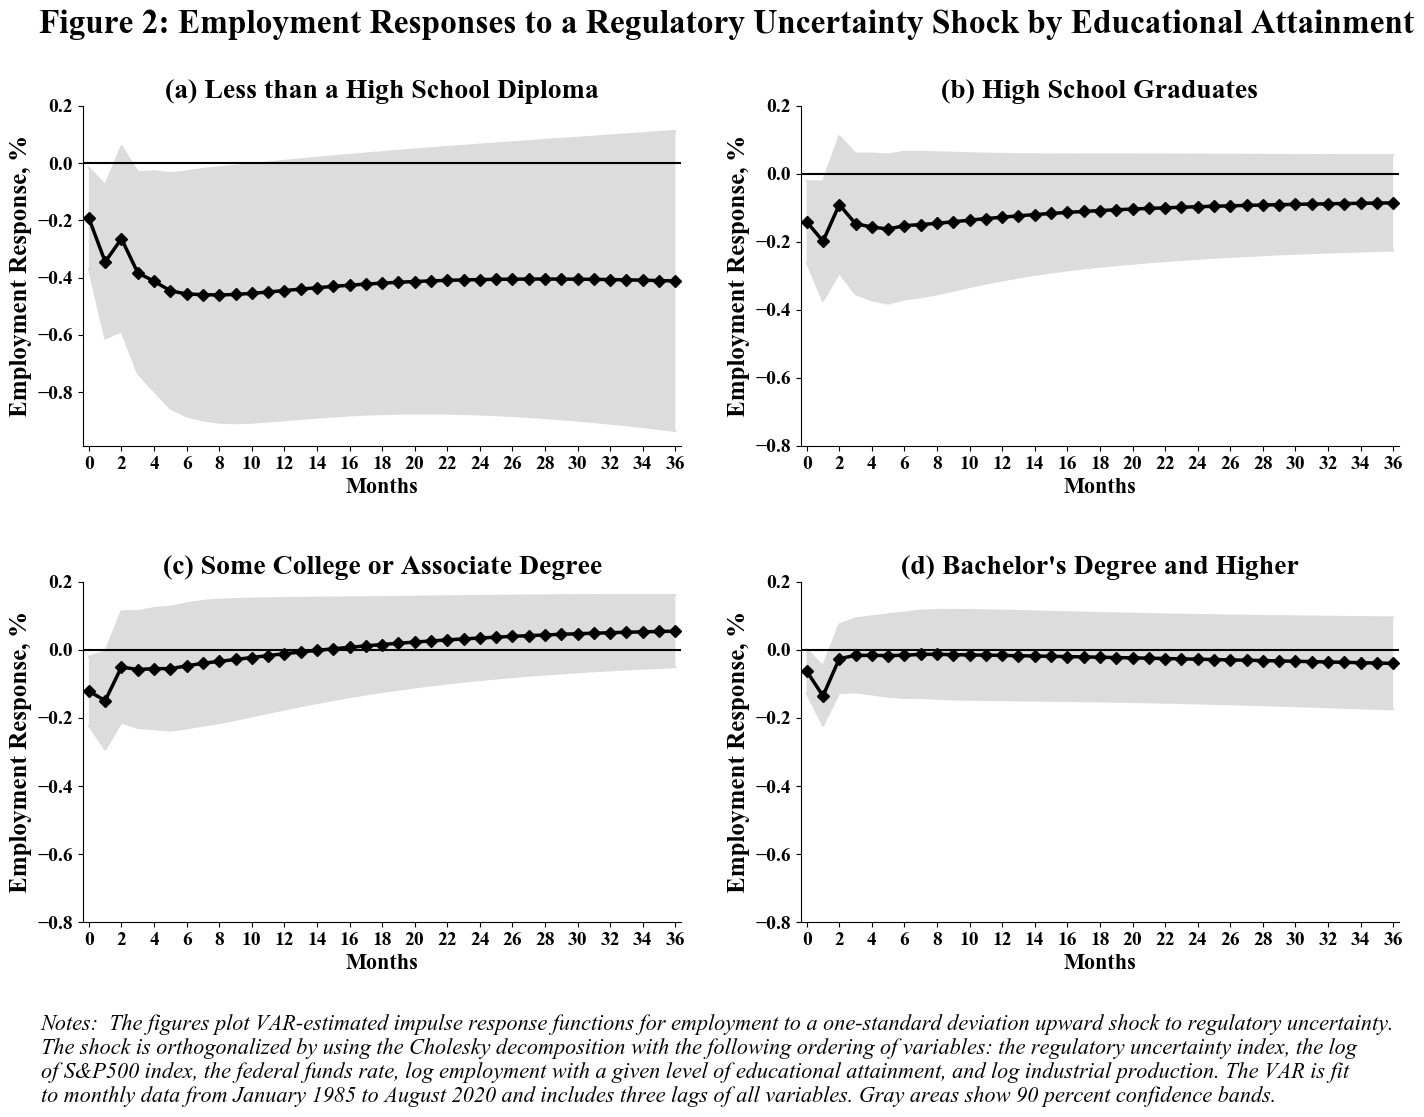 Figure Two: Employment Responses to a Regulatory Uncertainty Shock by Educational Attainment. Four shaded bar graphs showing the change of employment over time for (a) less than a high school diploma, (b) high school graduation, (c) some college or associate degree, and (d) bachelor's degree and higher.